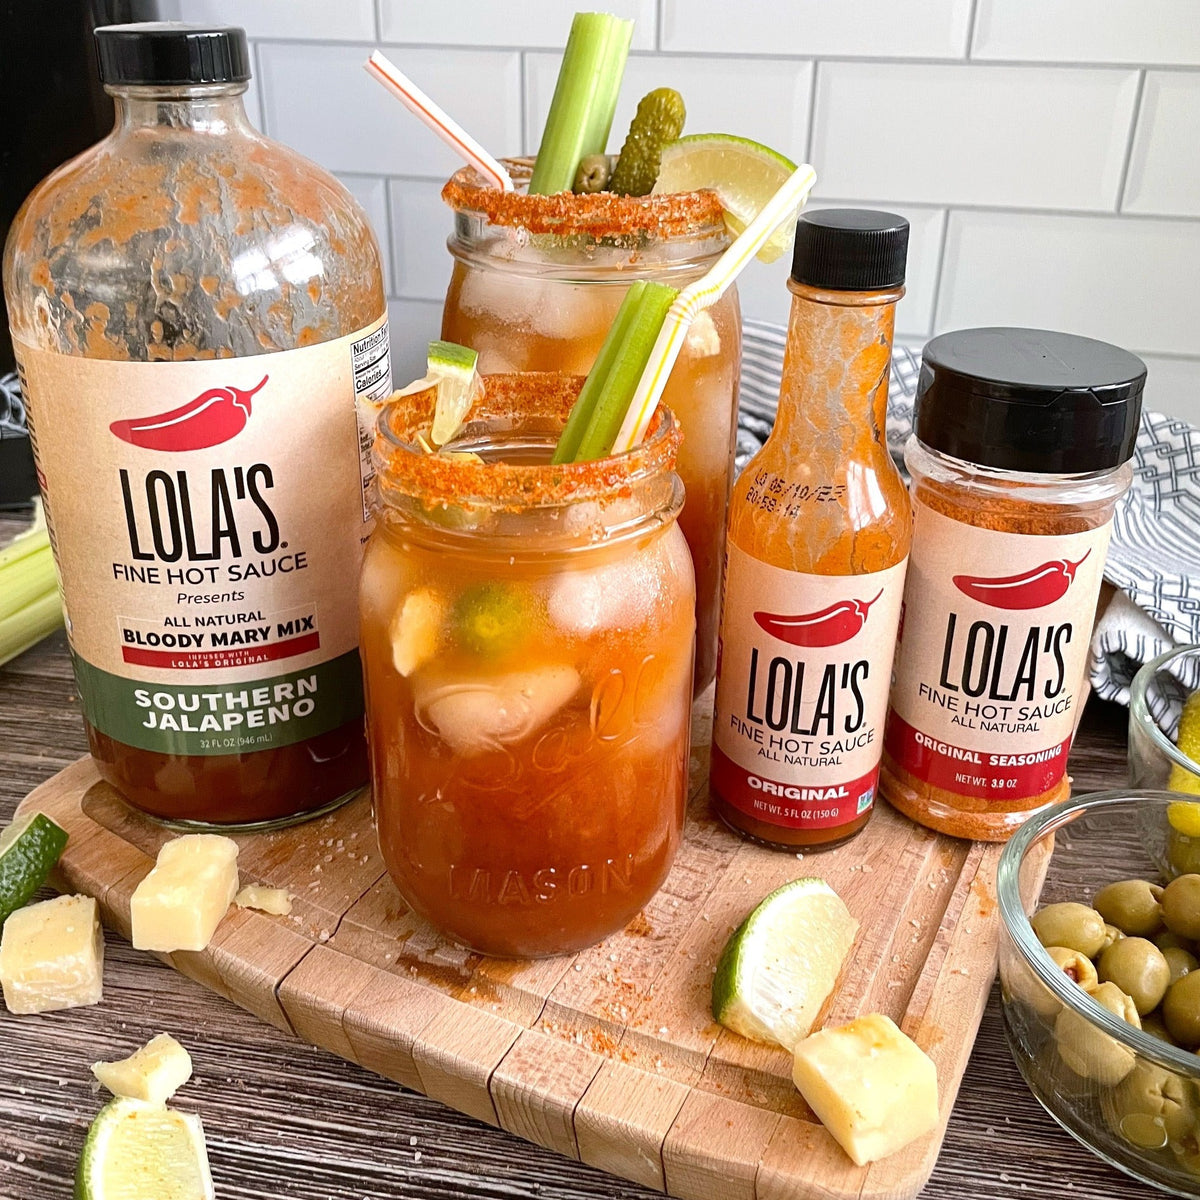 Lola's Original Seasoning: Bottles of smoky, sweet, and spicy hot sauce with a zesty lime twist, perfect for steaks, chicken, fish, and more!